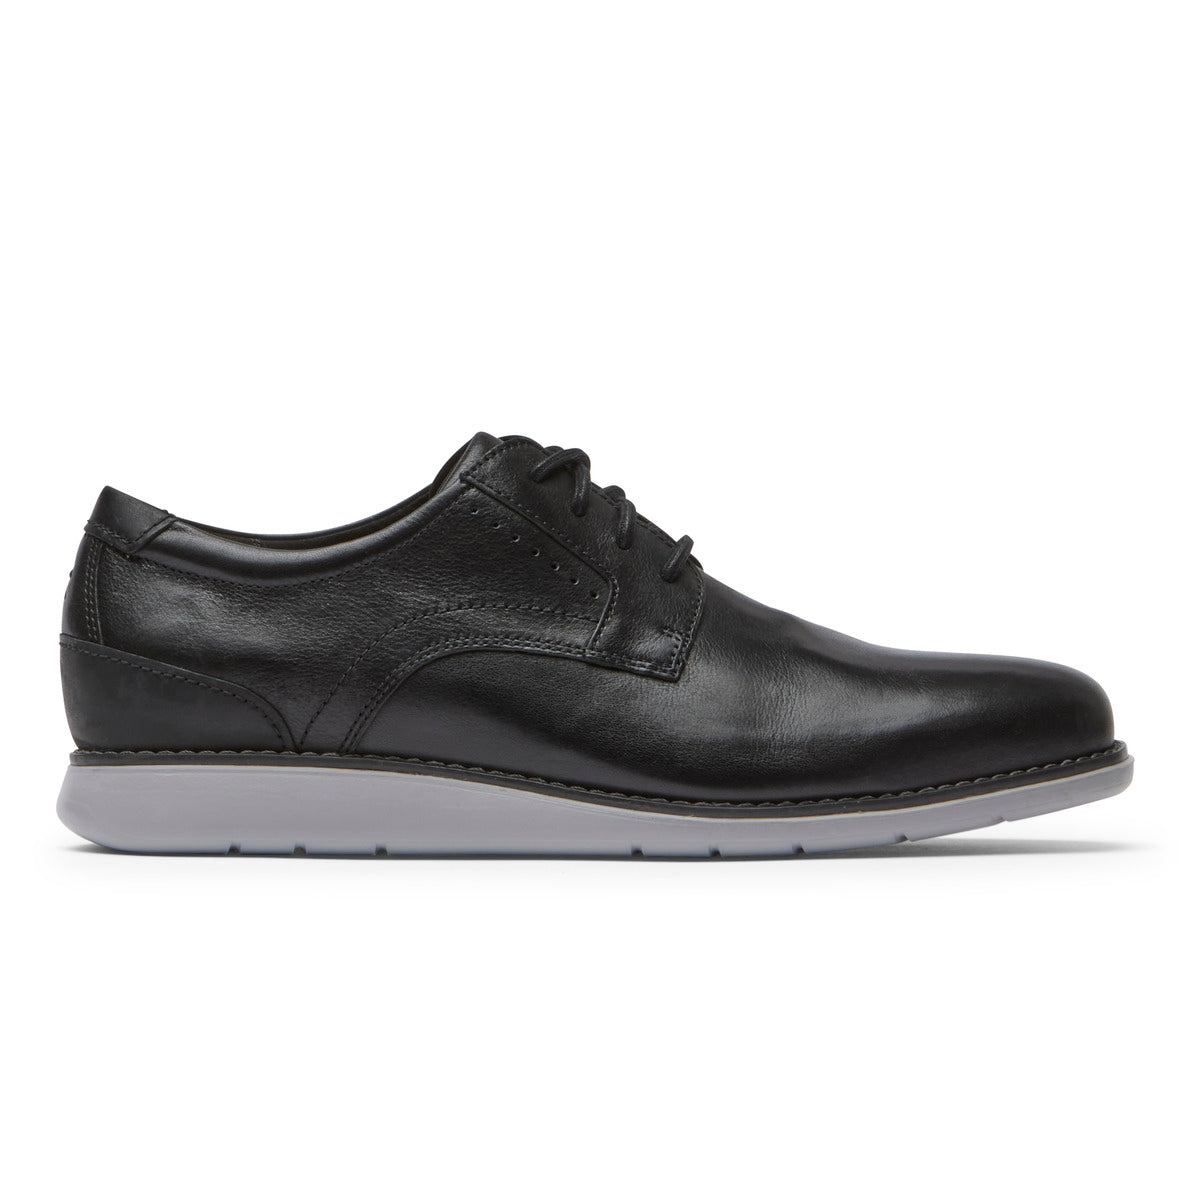 Zapatos Rockport Hombre Outlet - Zapatos Oxford Rockport Total